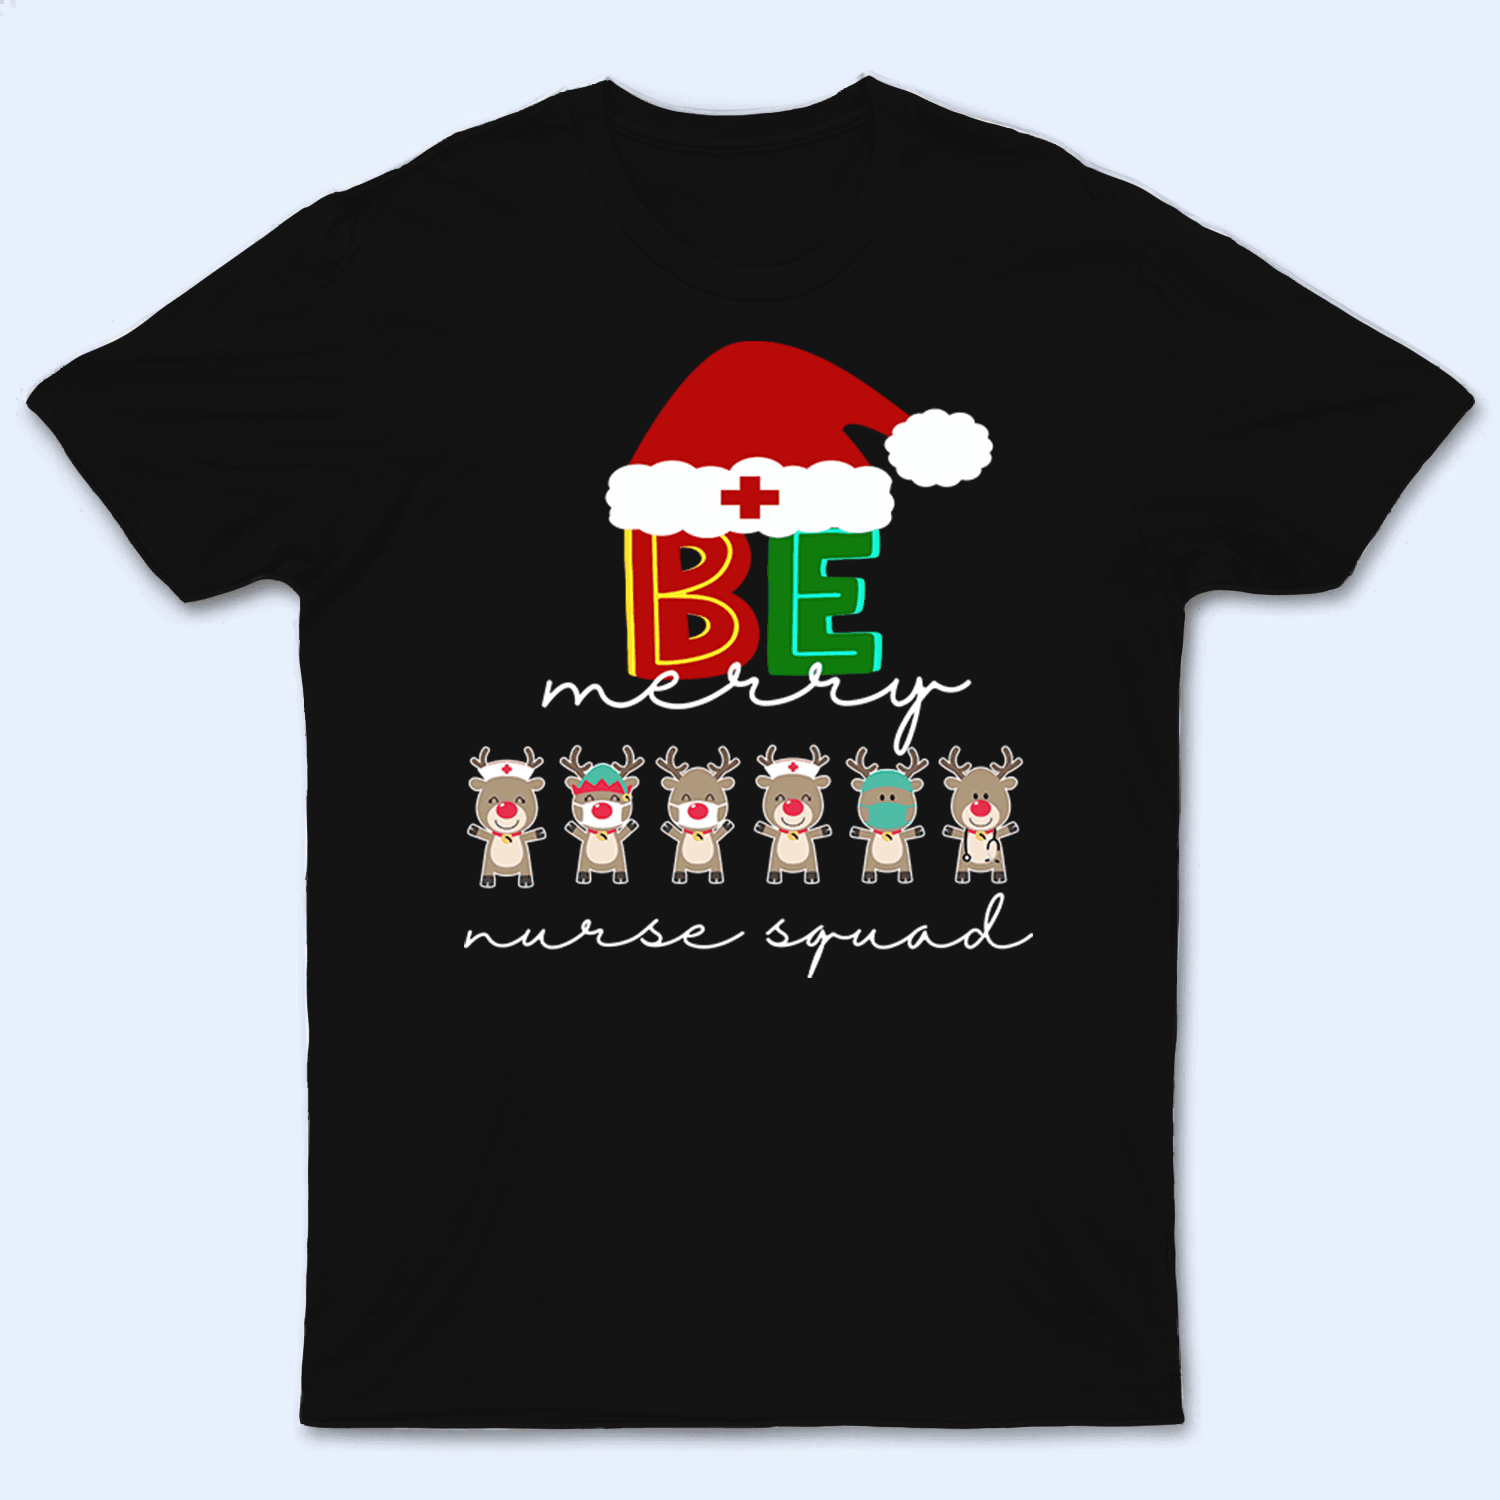 Health Reindeer Squad - Personalized Custom T Shirt - Birthday, Loving, Funny Gift for Nurse, CNA, Healthcare, Registered RN - Suzitee Store